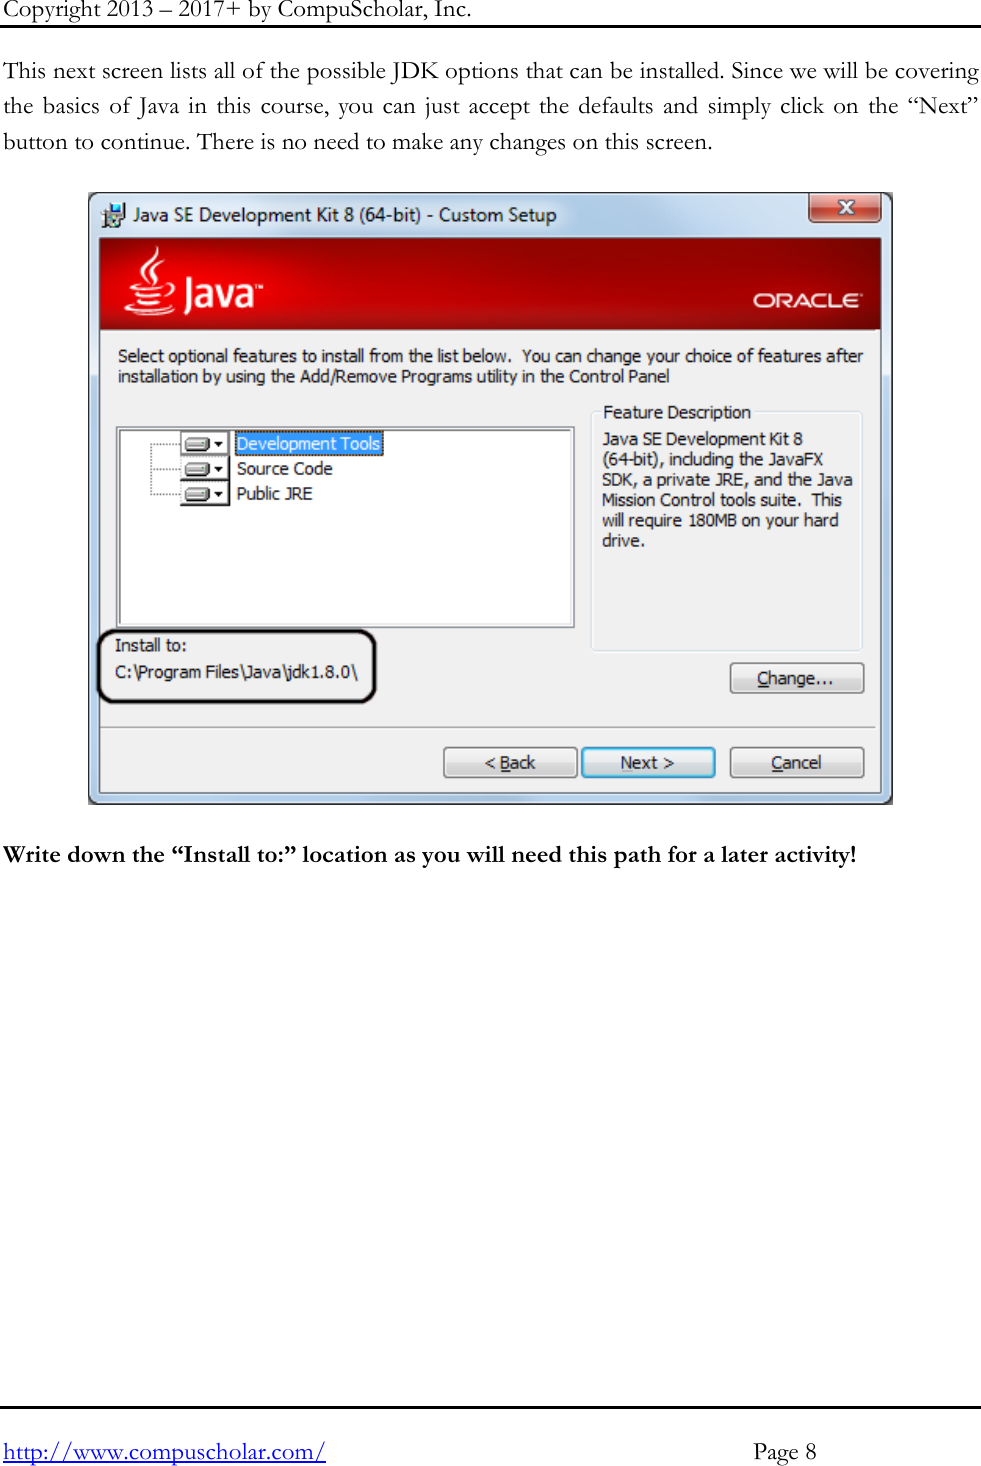 Page 8 of 12 - Java JDK Install Instructions Windows